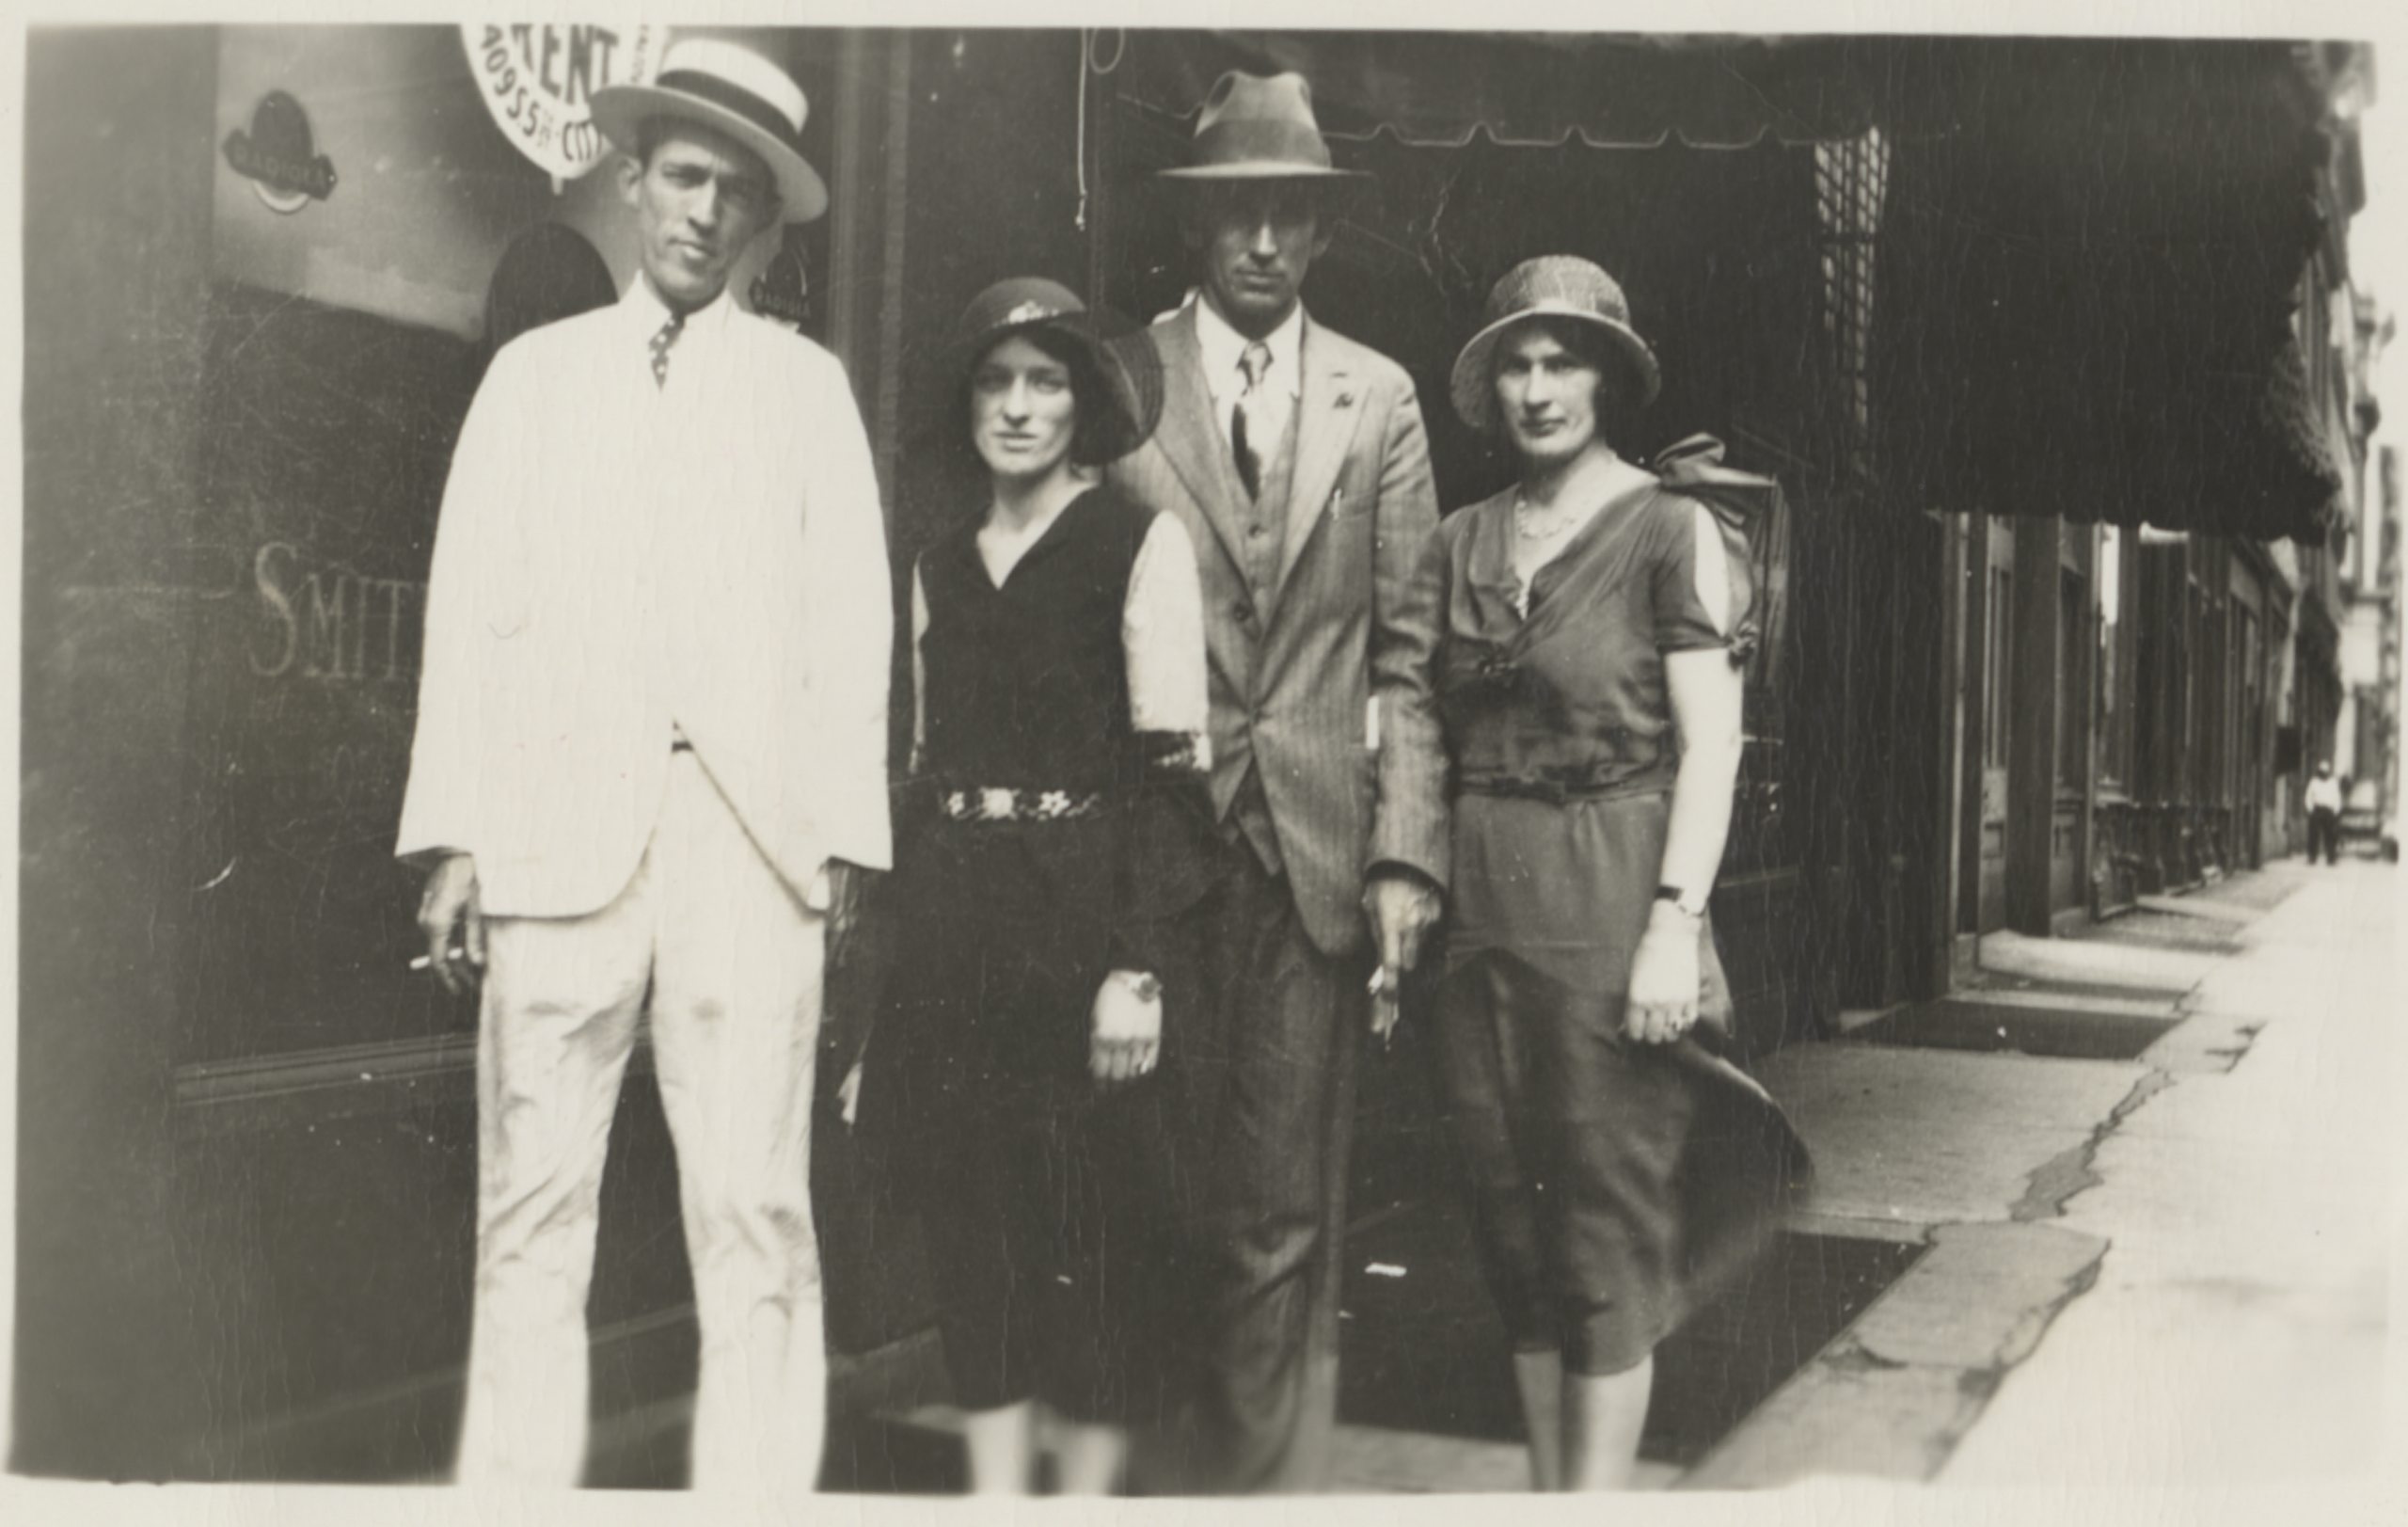 Photo of the first big country music stars Jimmie Rodgers and the Carter Family standing together on a city sidewalk..